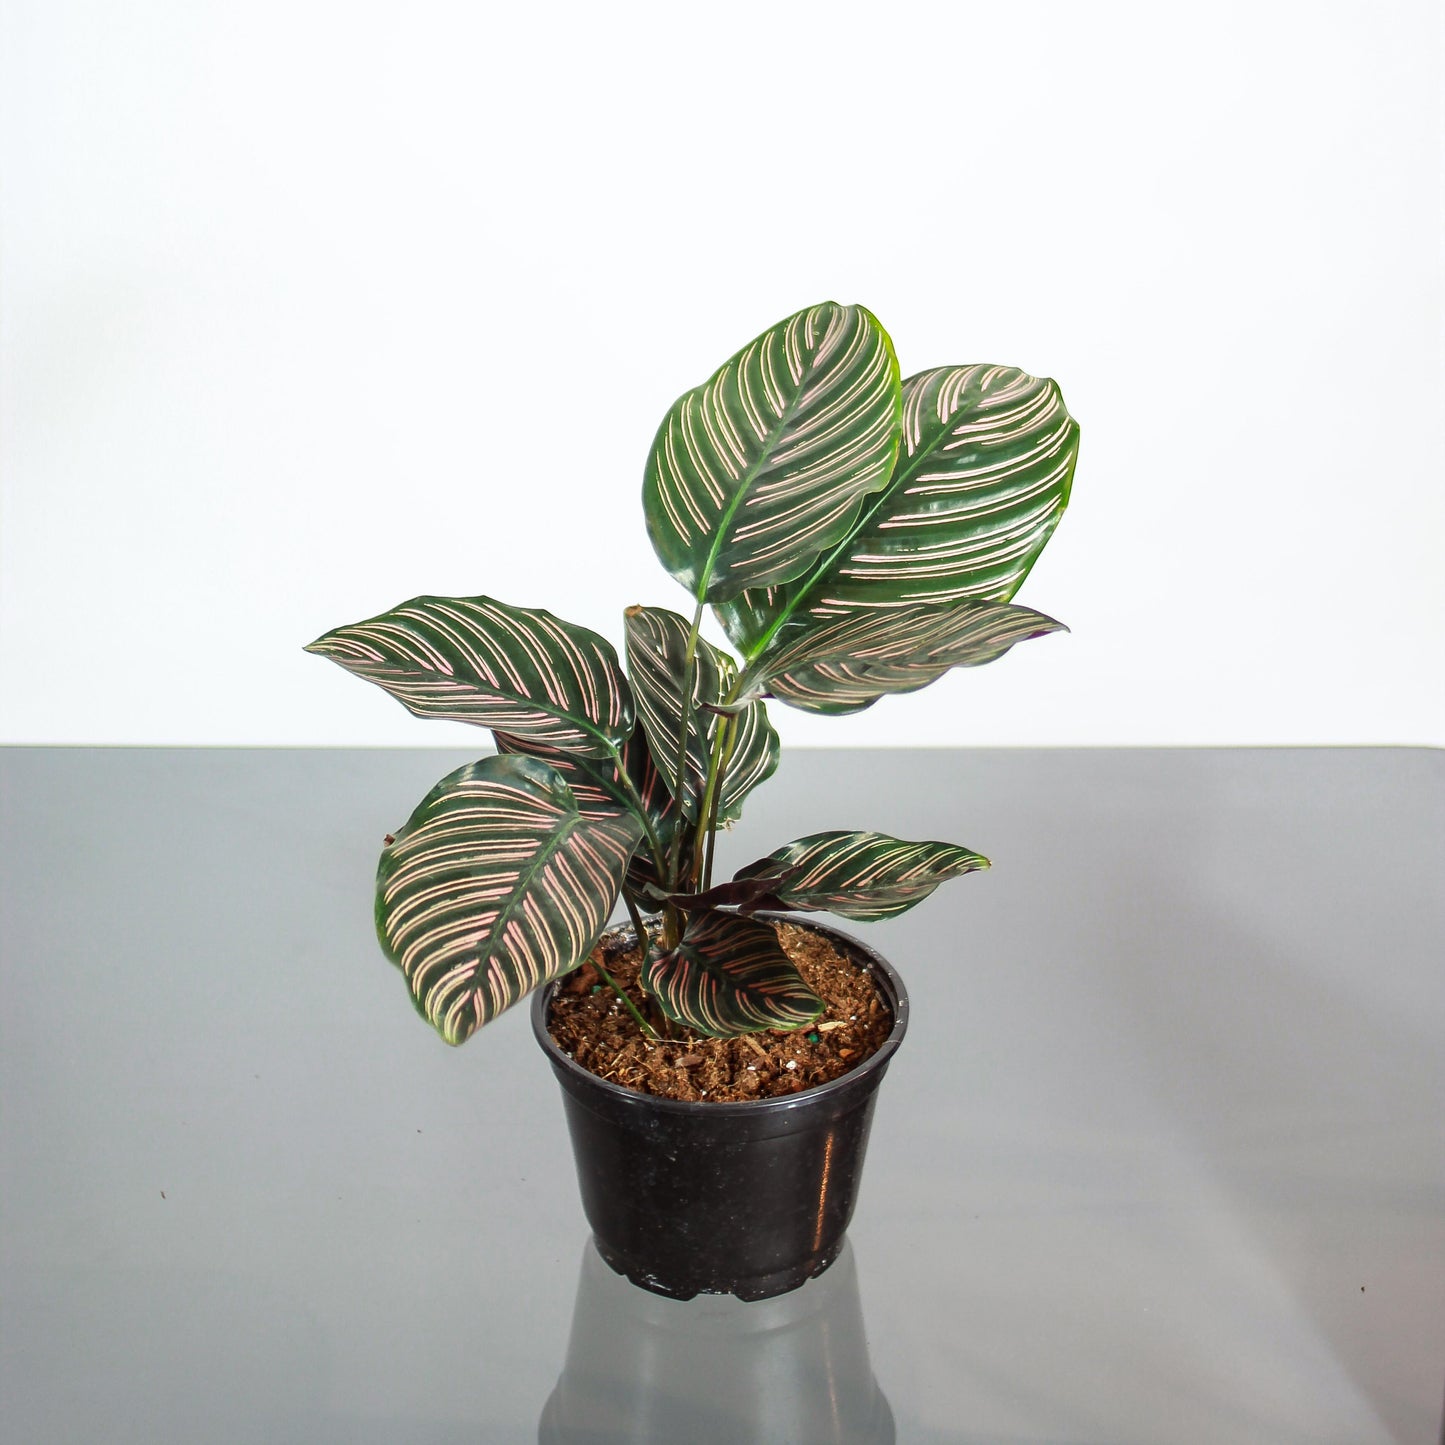 Pinstripe Calathea (Goeppertia ornata) in a 4 inch pot. Indoor plant for sale by Promise Supply for delivery and pickup in Toronto